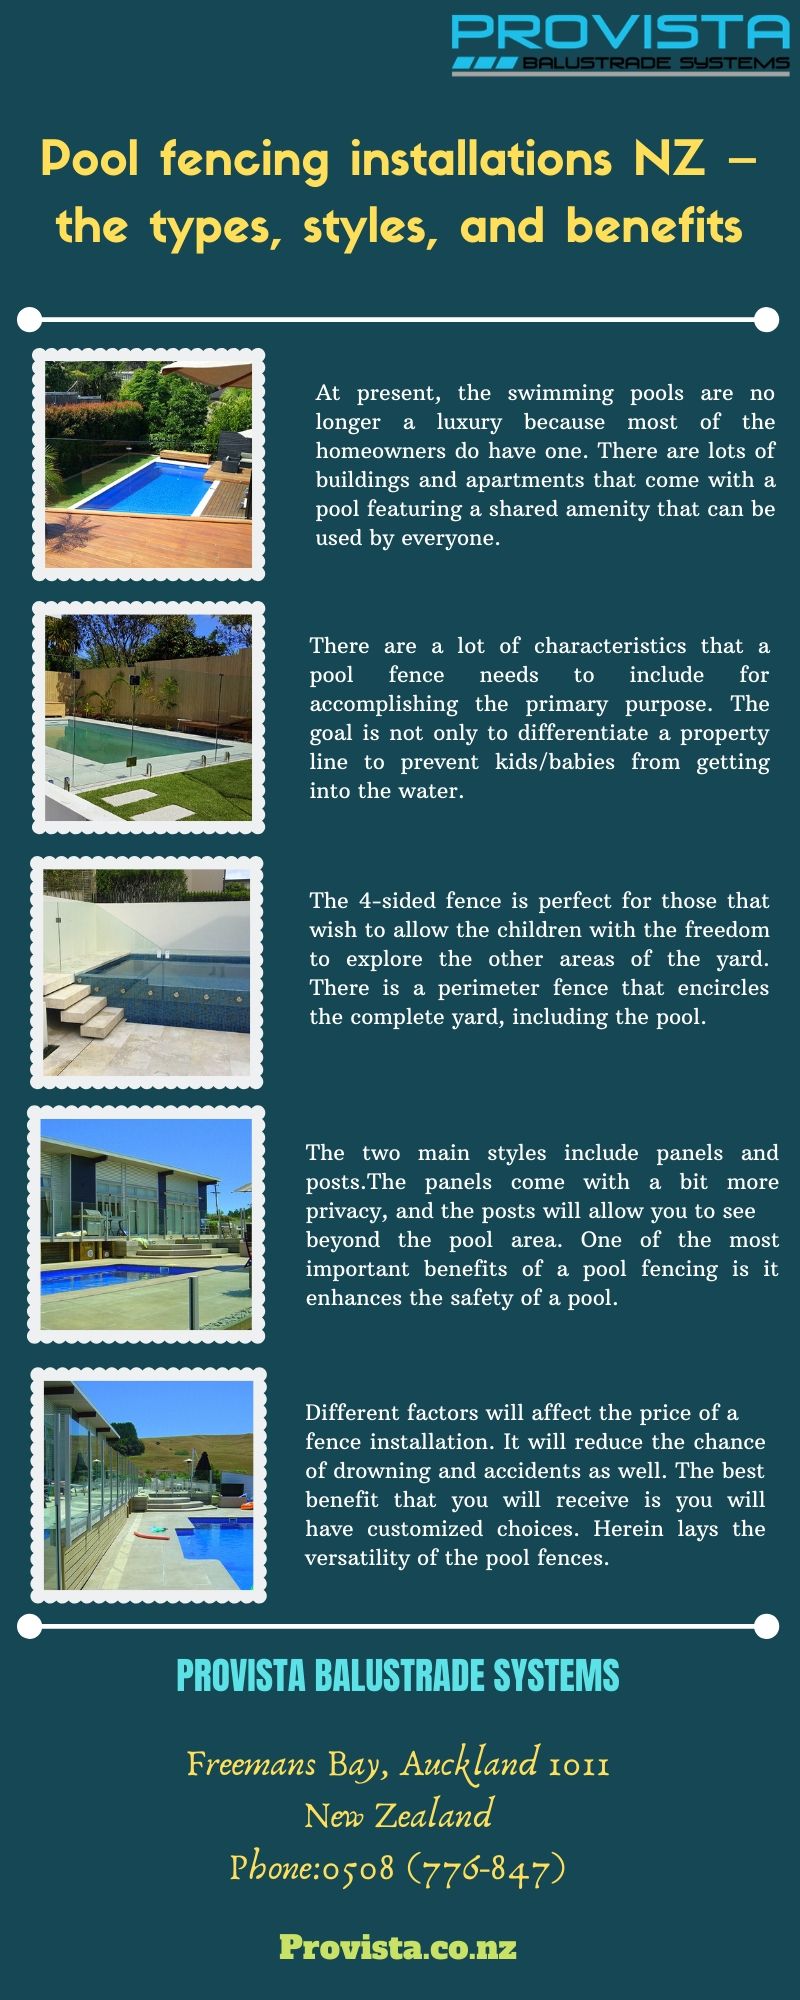 Pool fencing installations NZ – the types, styles, and benefits When it comes to choosing the pool fencing installations NZ, you will have a lot of options. For those that are looking to get a natural appeal, you can opt for wood. For more details, visit this link: https://bit.ly/2I5B8n1
 by Provista